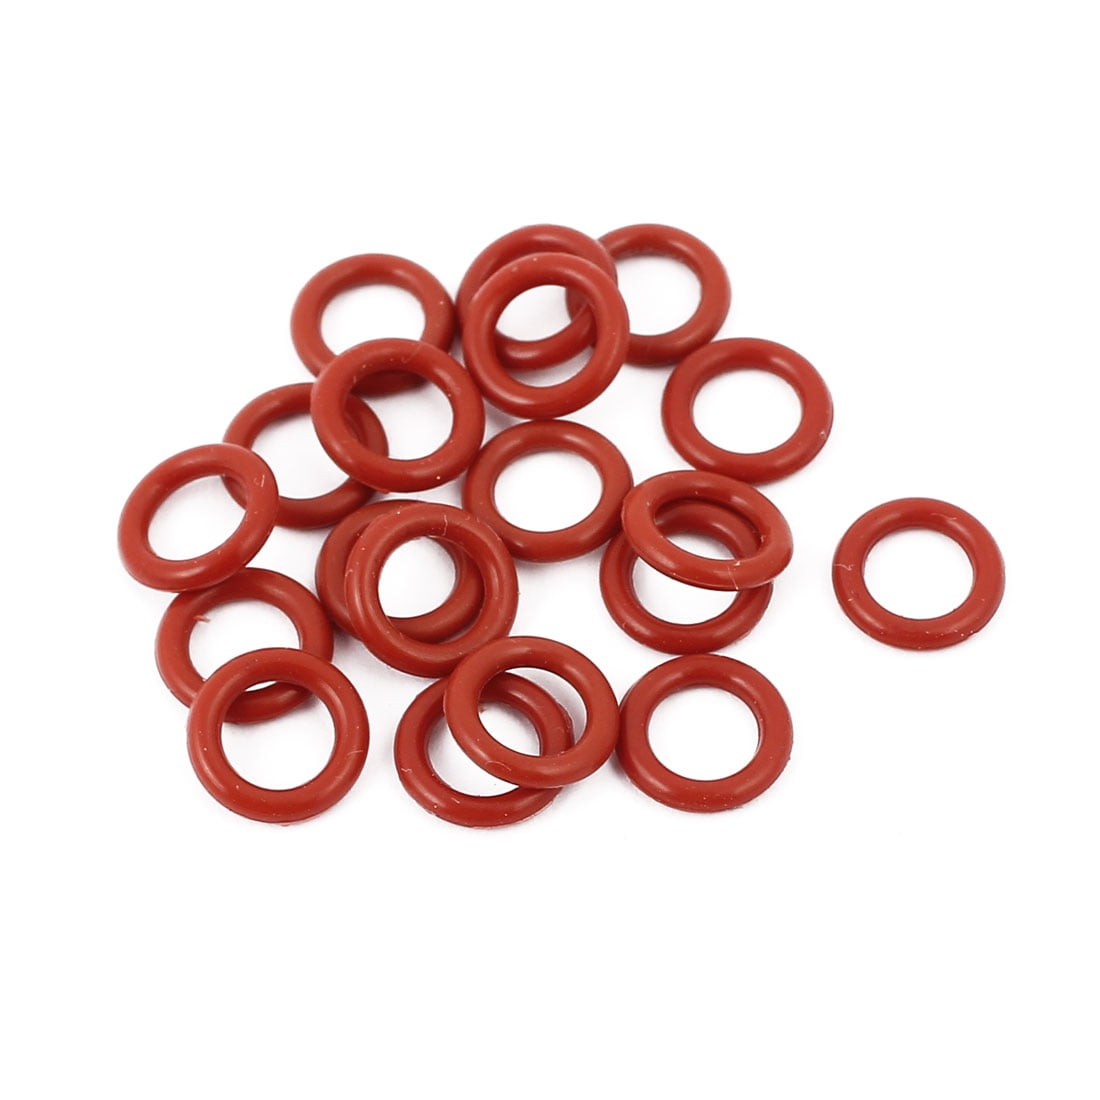 Silicone O-rings 11 x 1.5mm Price for 10 pcs 